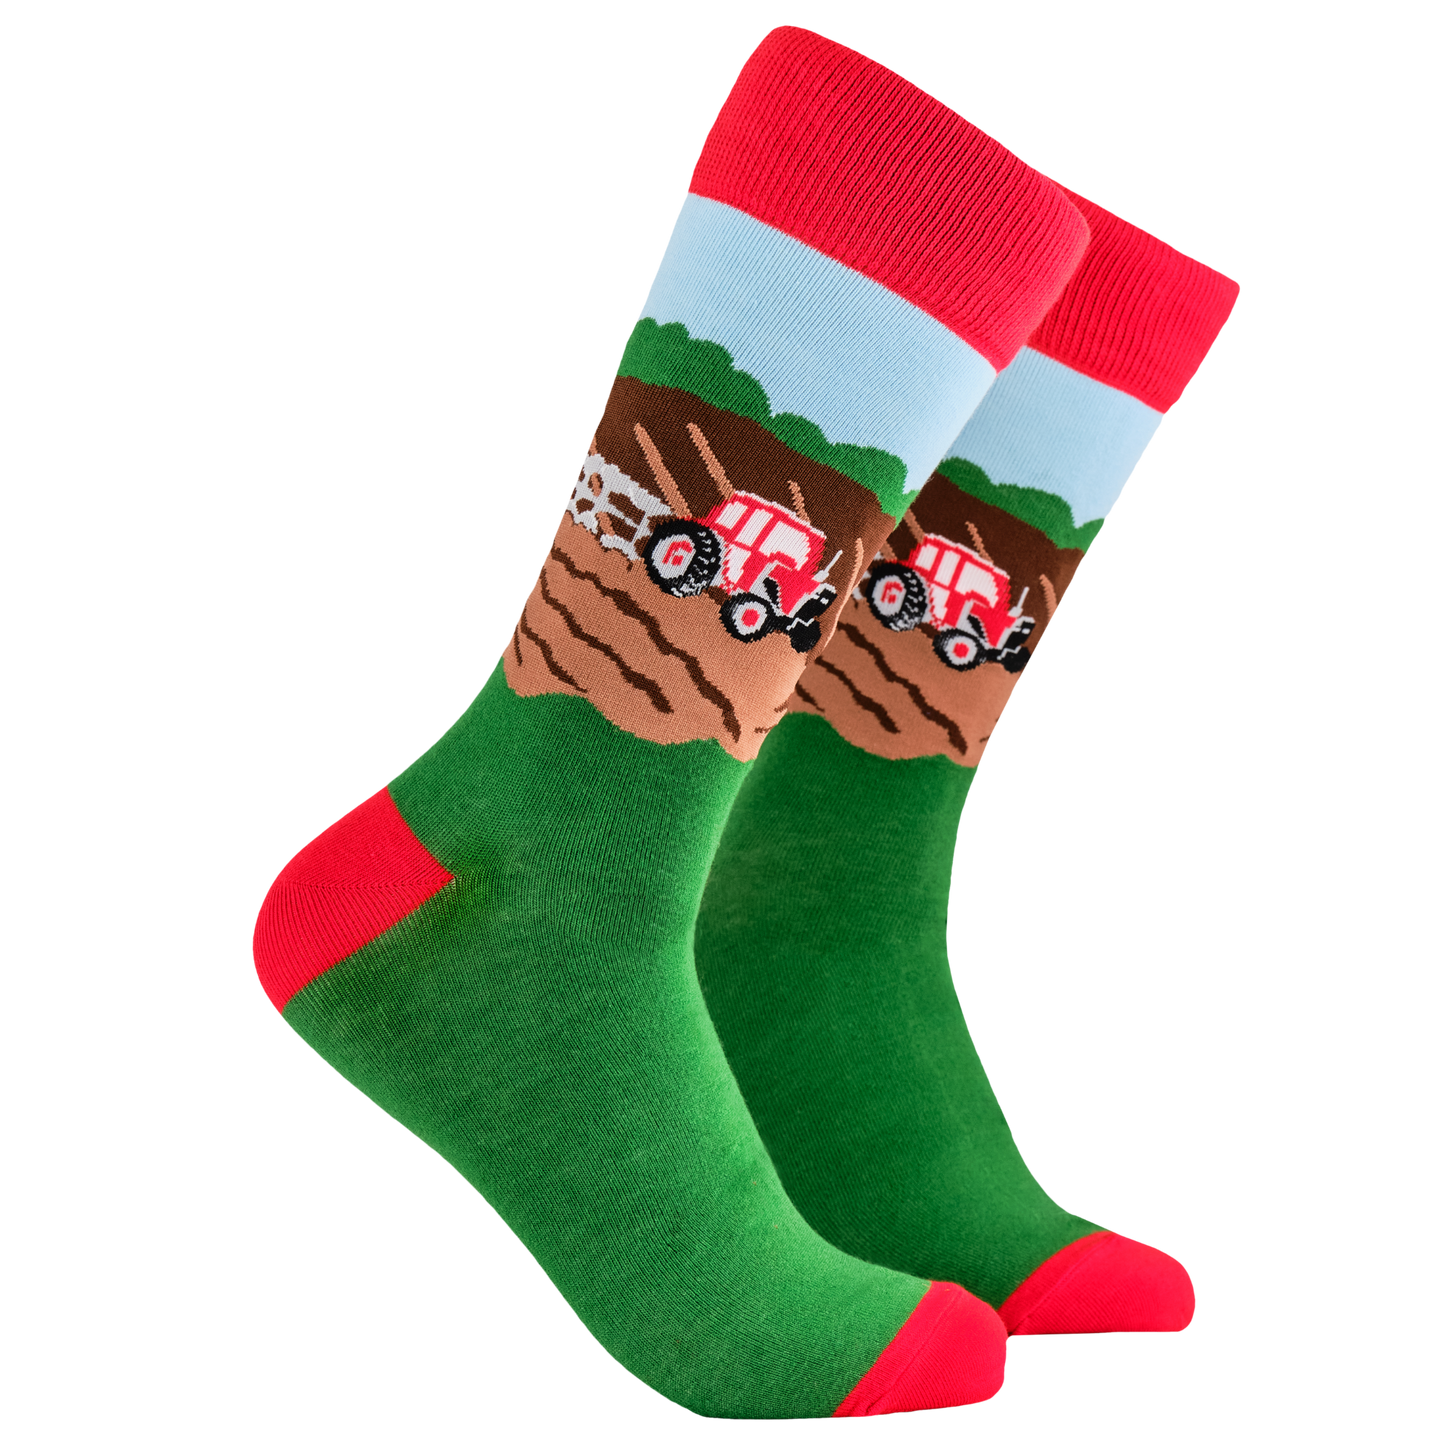 Farming Life Socks. A pair of socks depicting farm life and tractor plowing the field.. Green legs, red cuff, heel and toe.